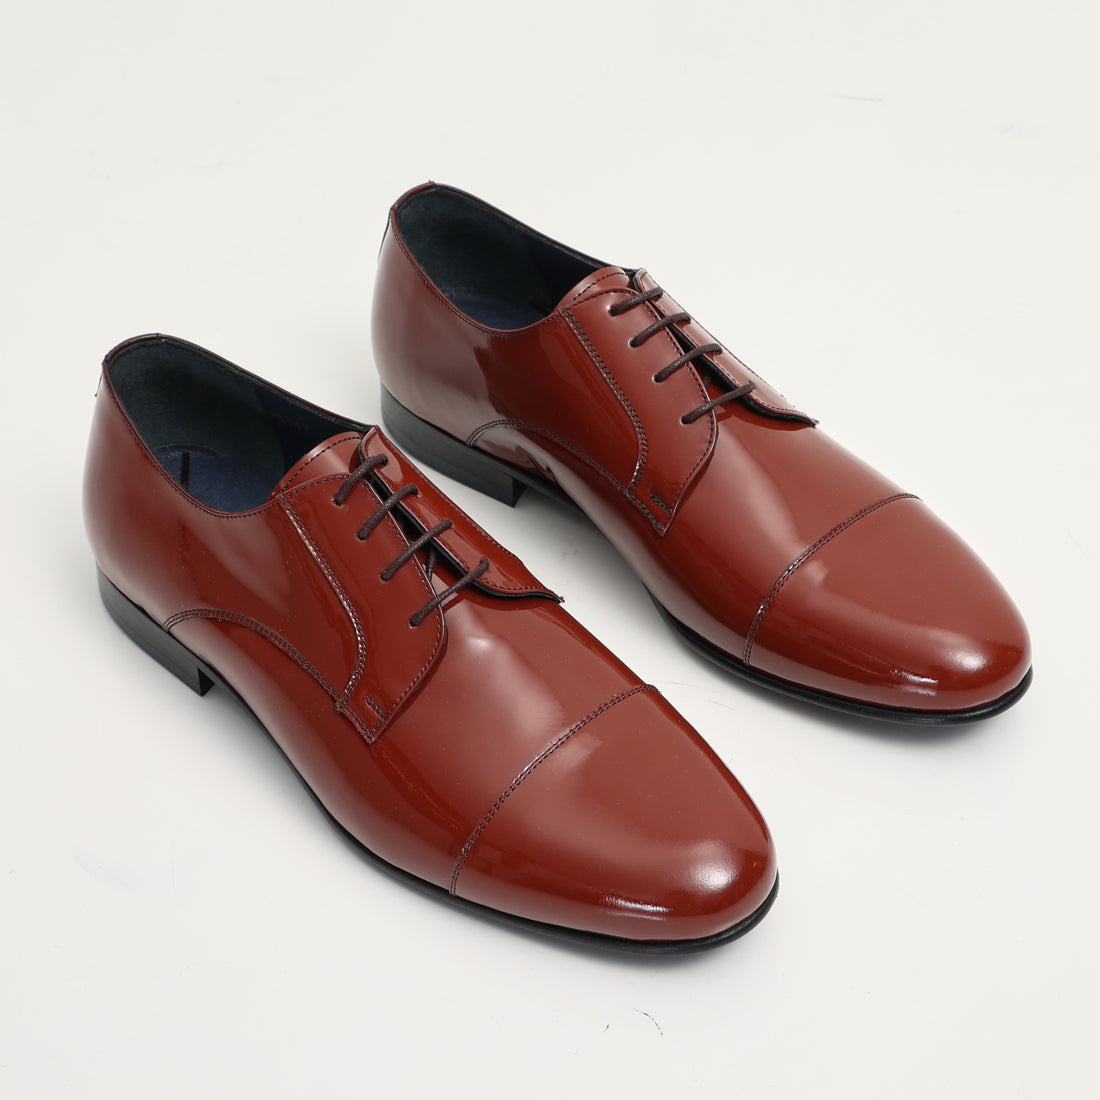 N° D5590 PATENT LEATHER SHOES - Rust